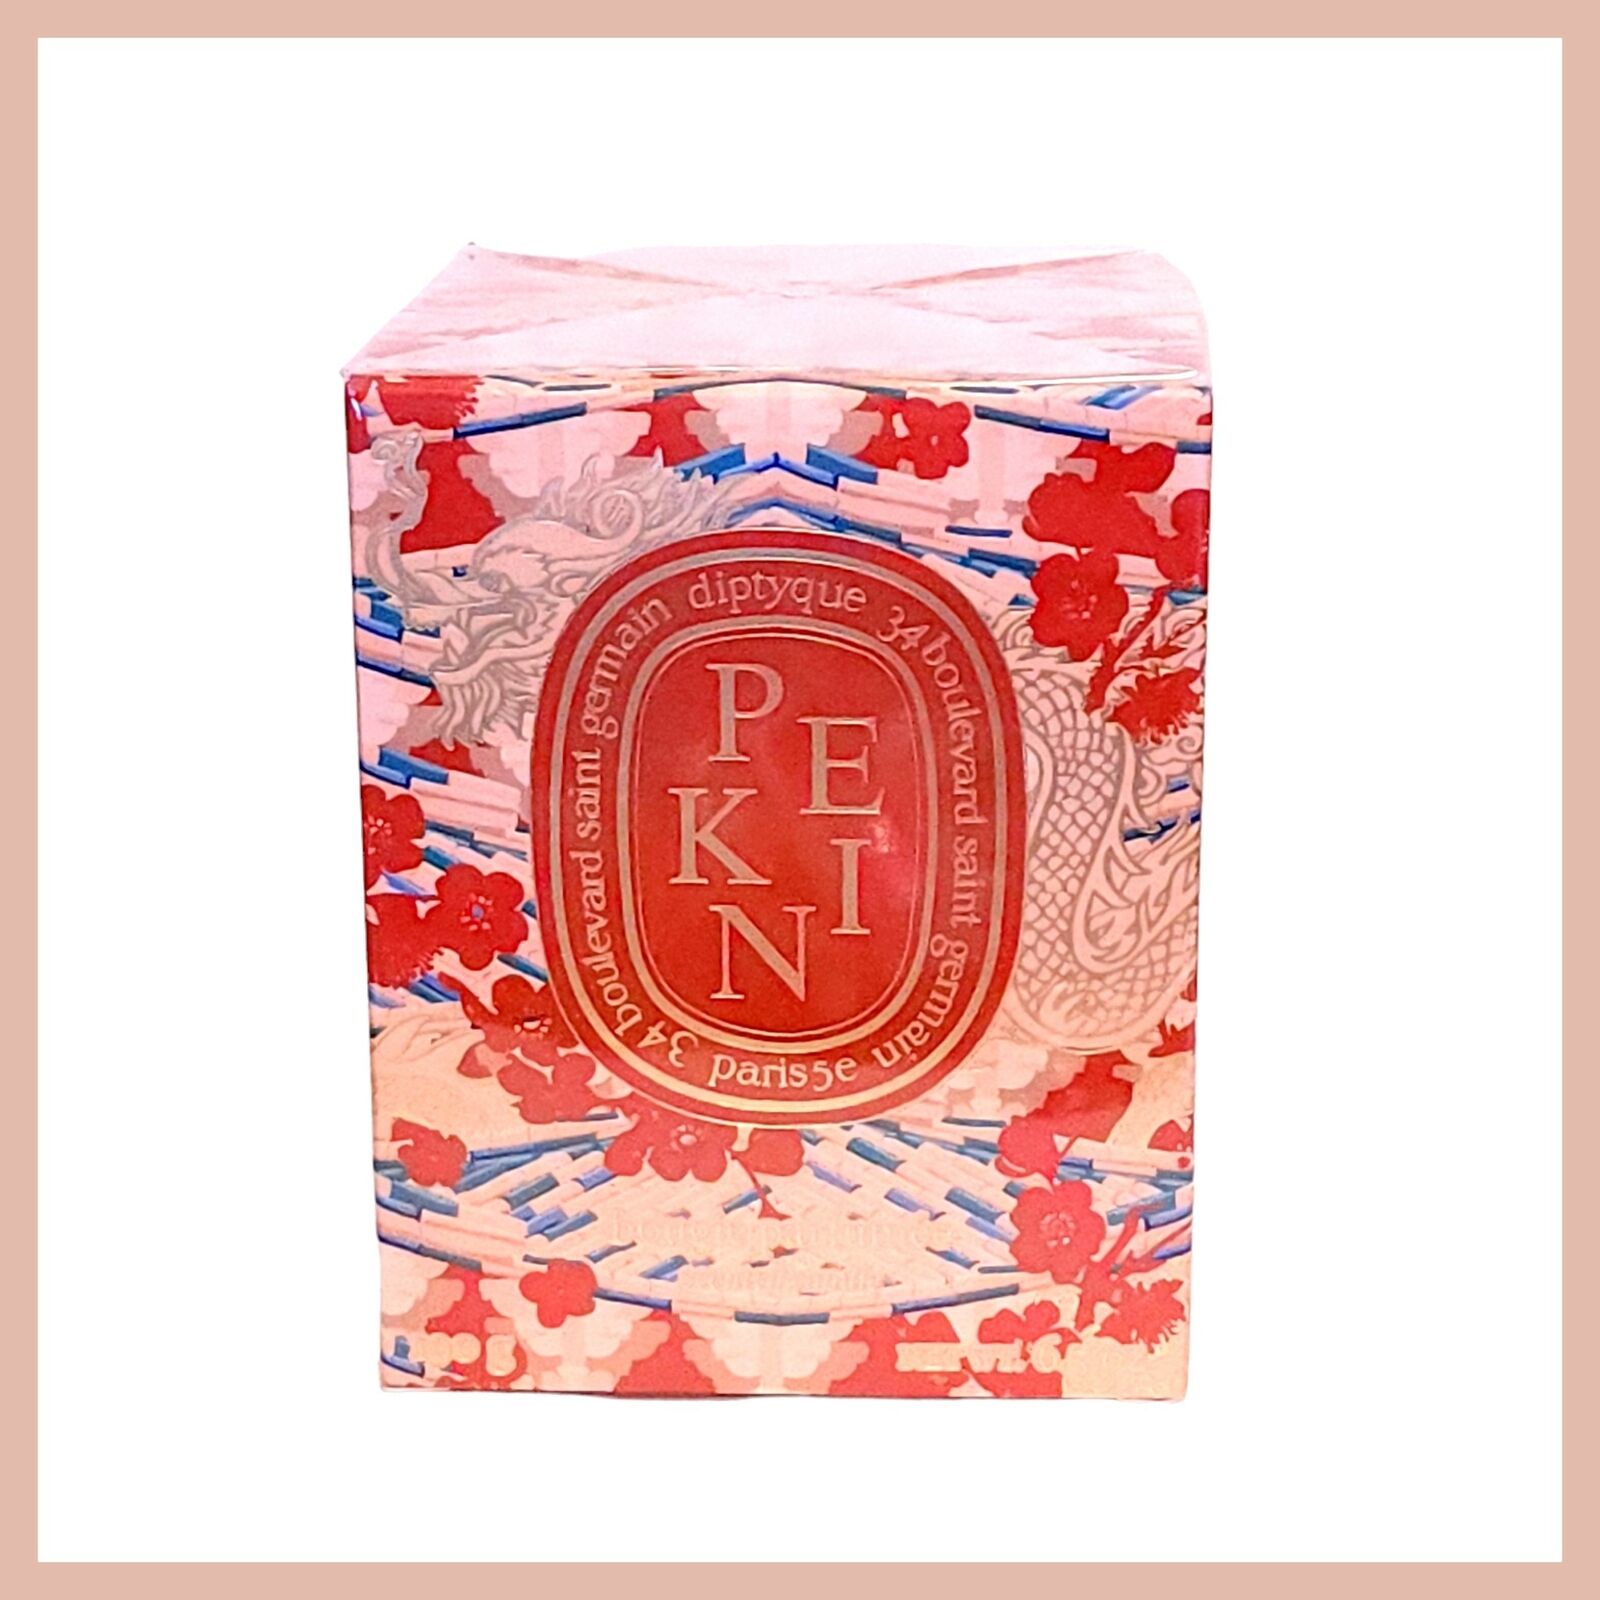 Diptyque City Pekin / Beijing Floral Scented Candle 6.5 oz 190 g Full Size